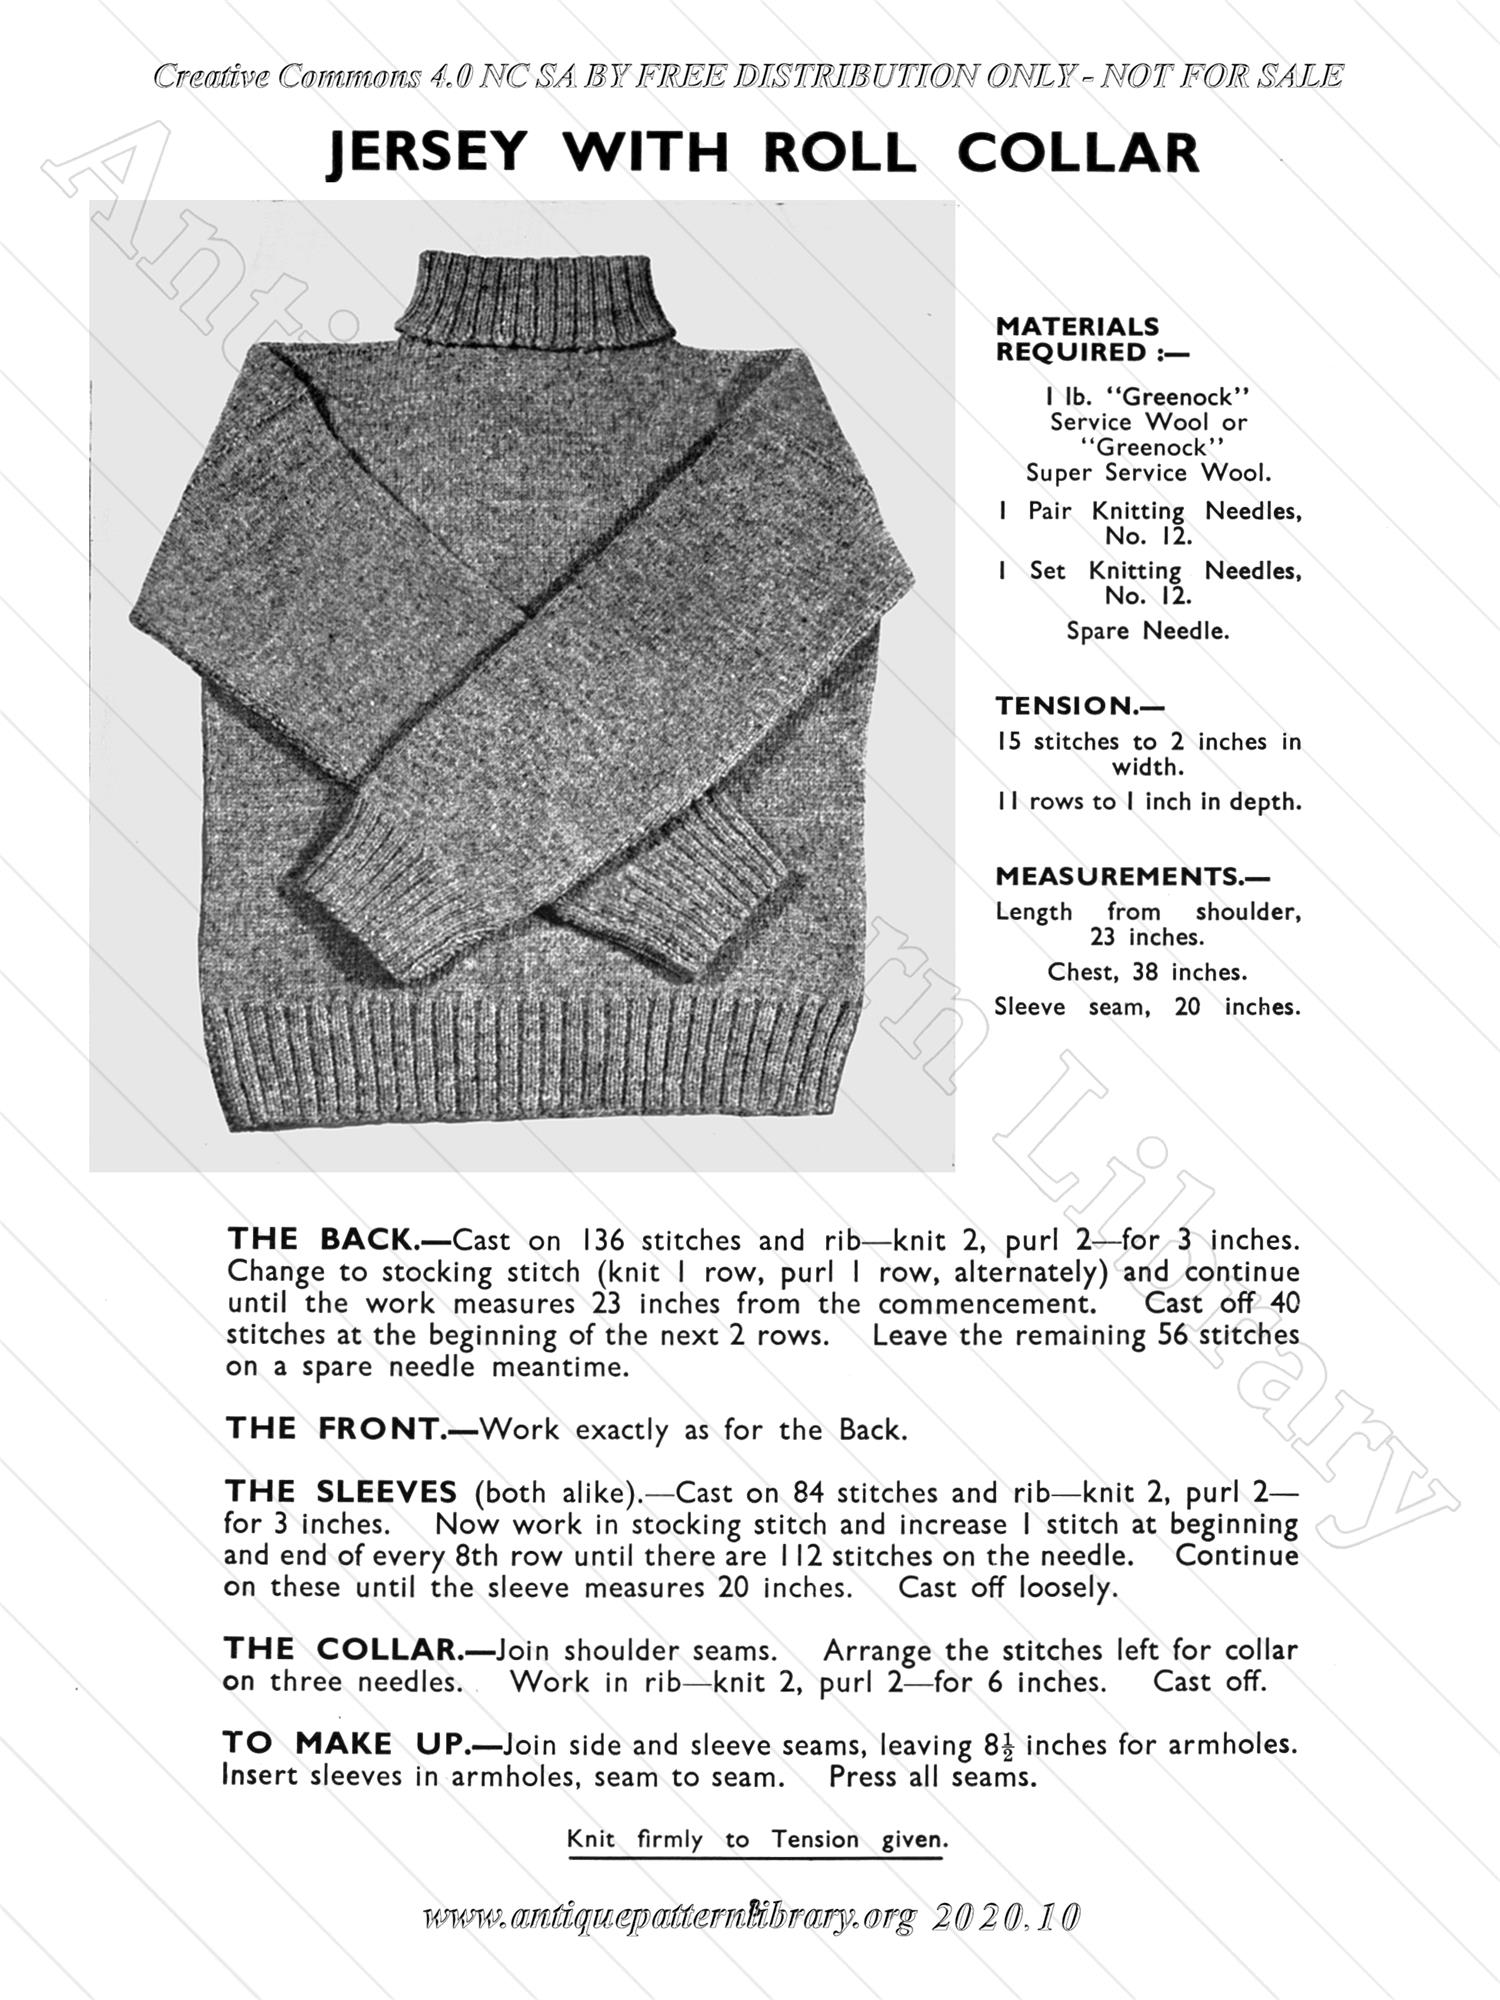 F-WM176 Knitted Comforts for Sailors, Soldiers and Airmen 